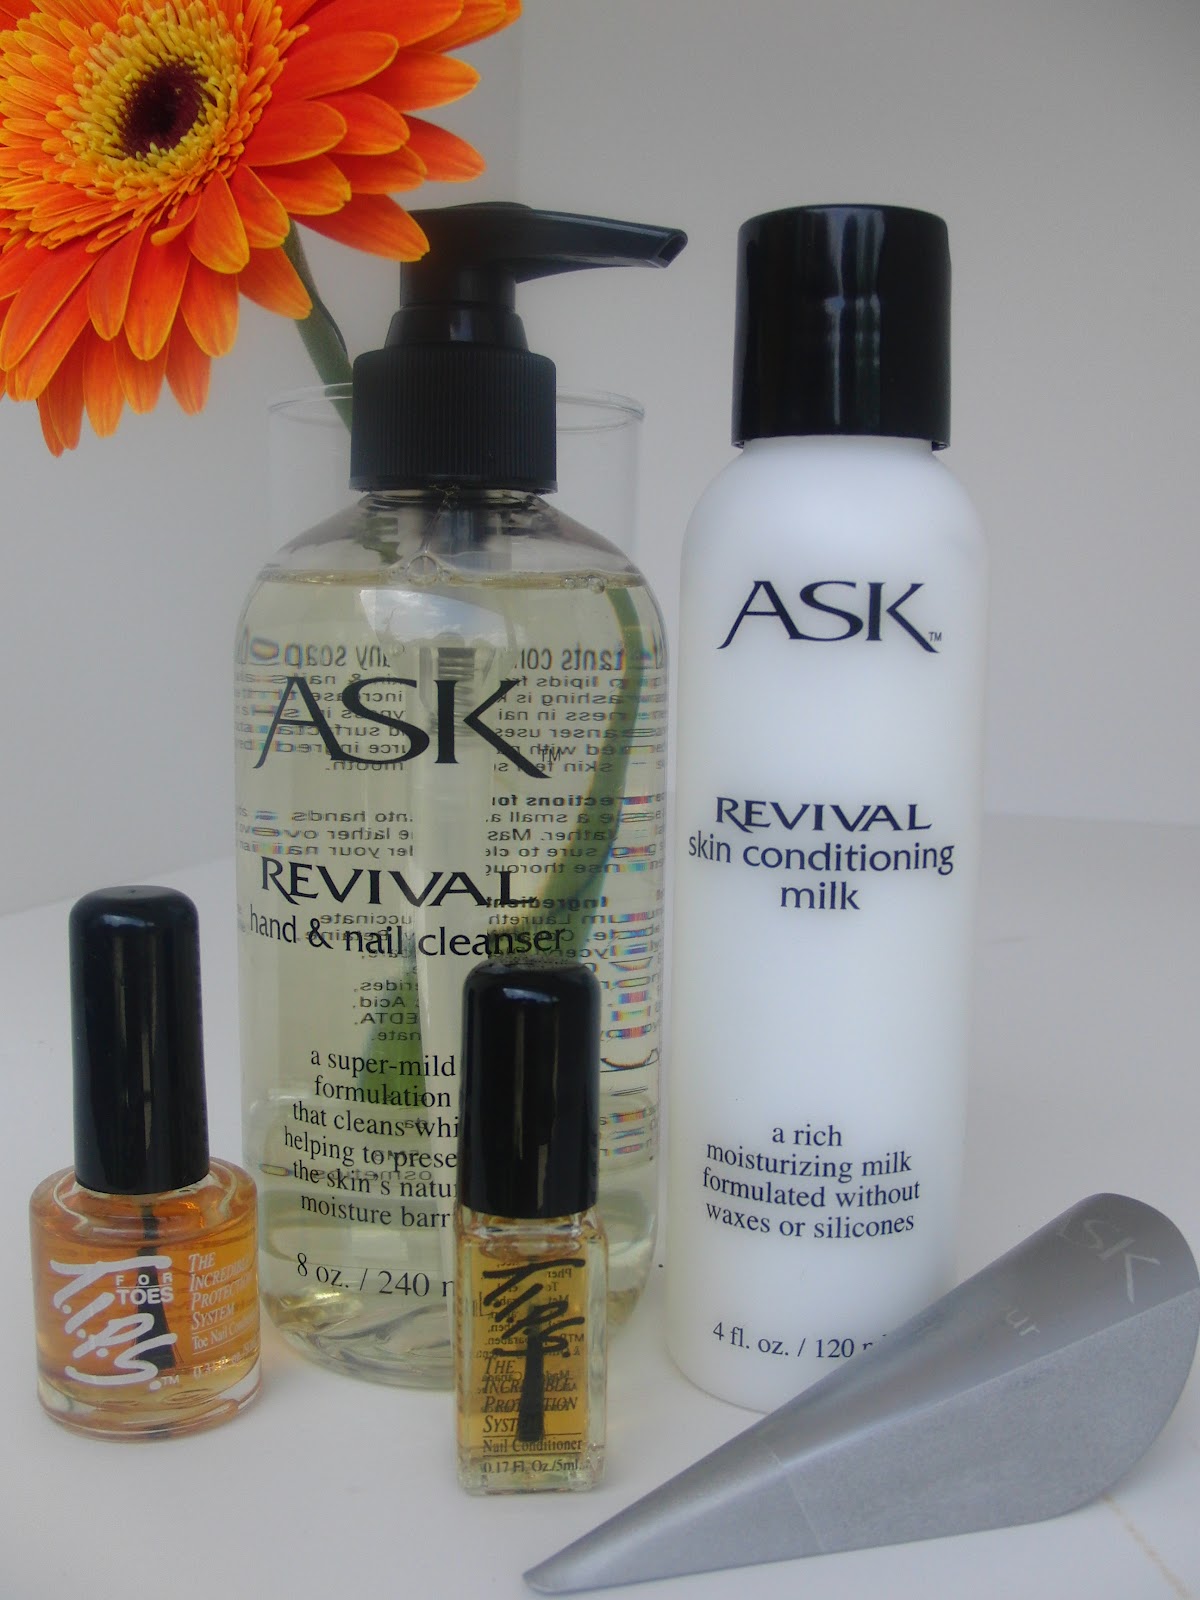 ASK Cosmetics Facebook page and/or a follower of Lisa's Nailcare Blog